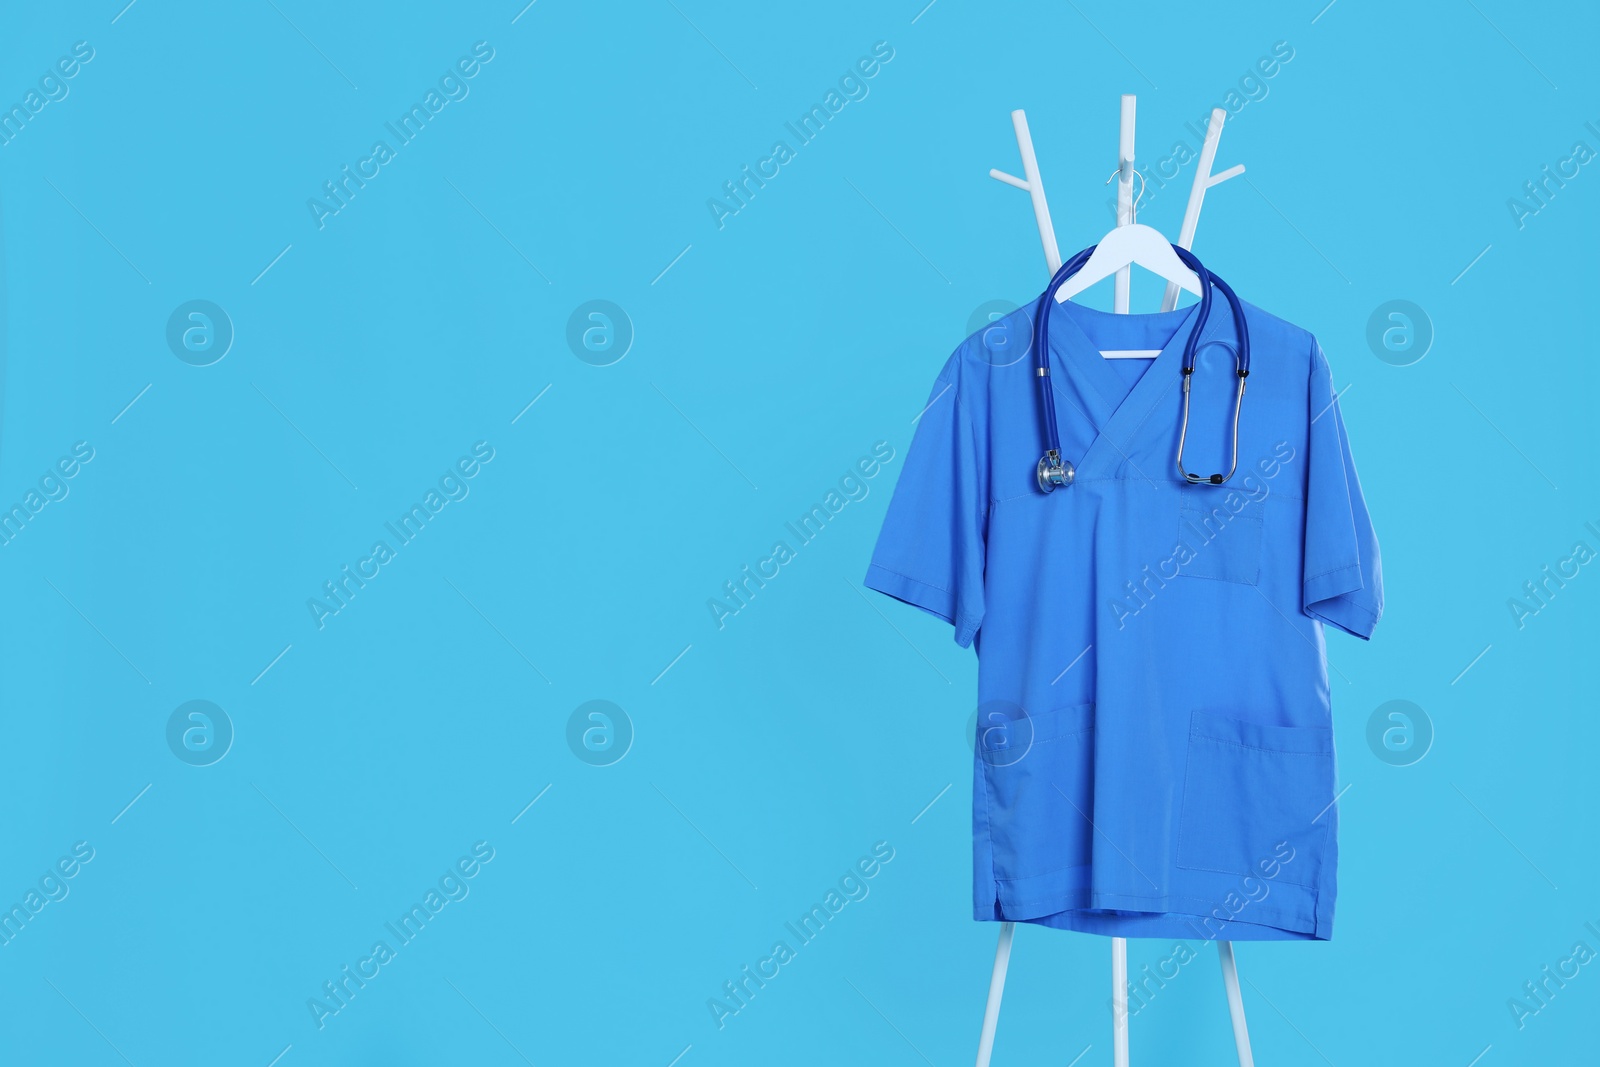 Photo of Medical uniform and stethoscope hanging on rack against light blue background. Space for text